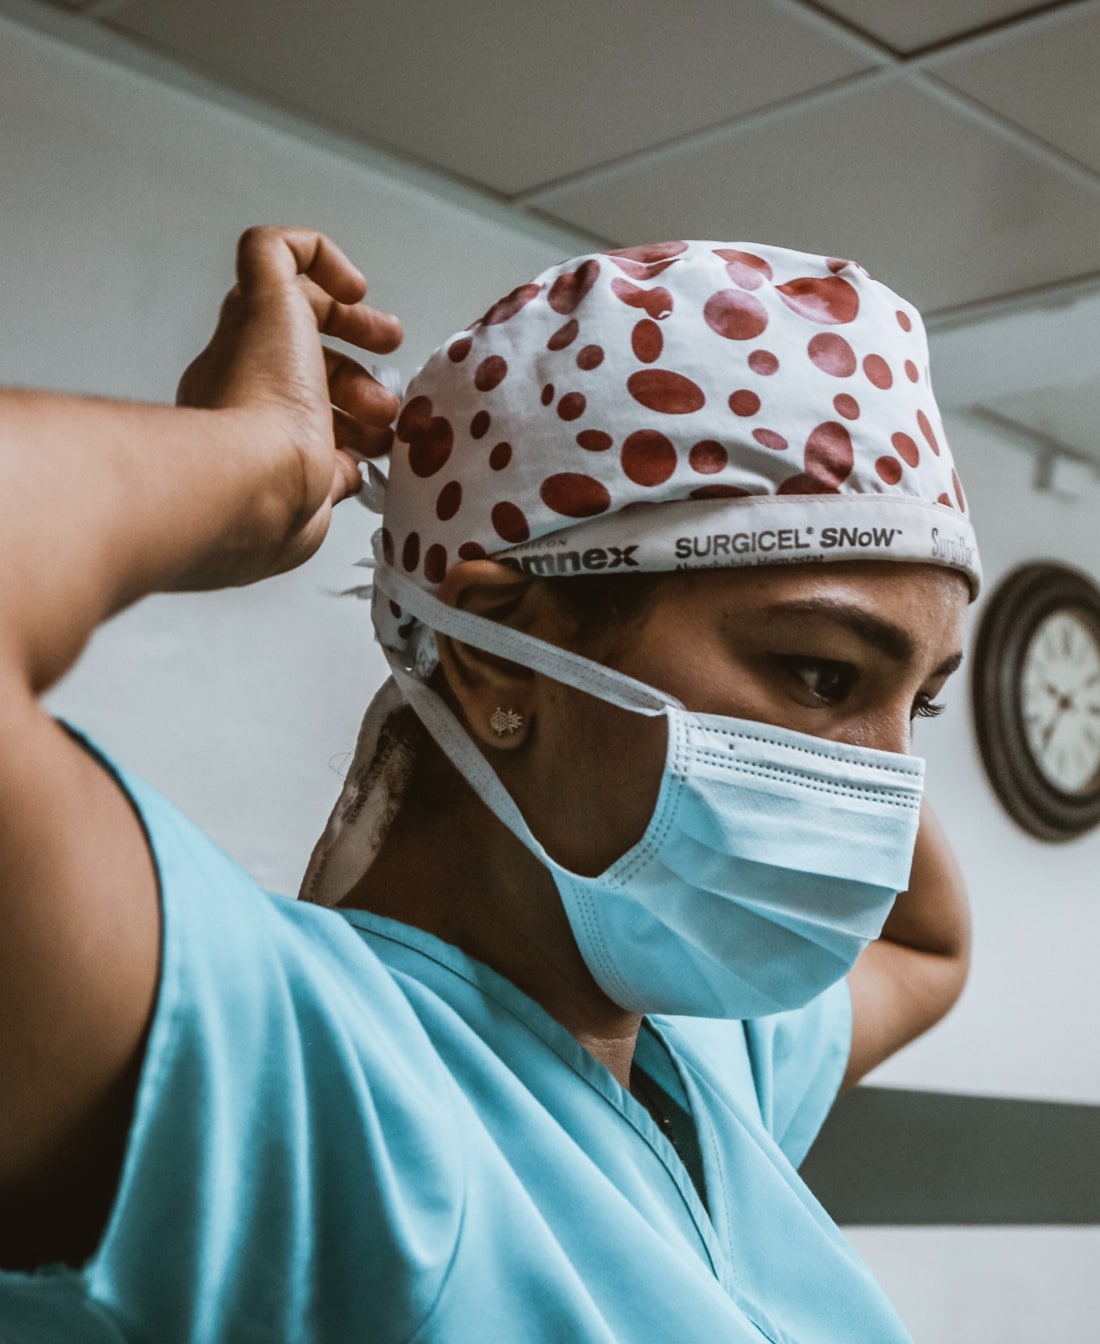 A nurse putting on surgical PPE.